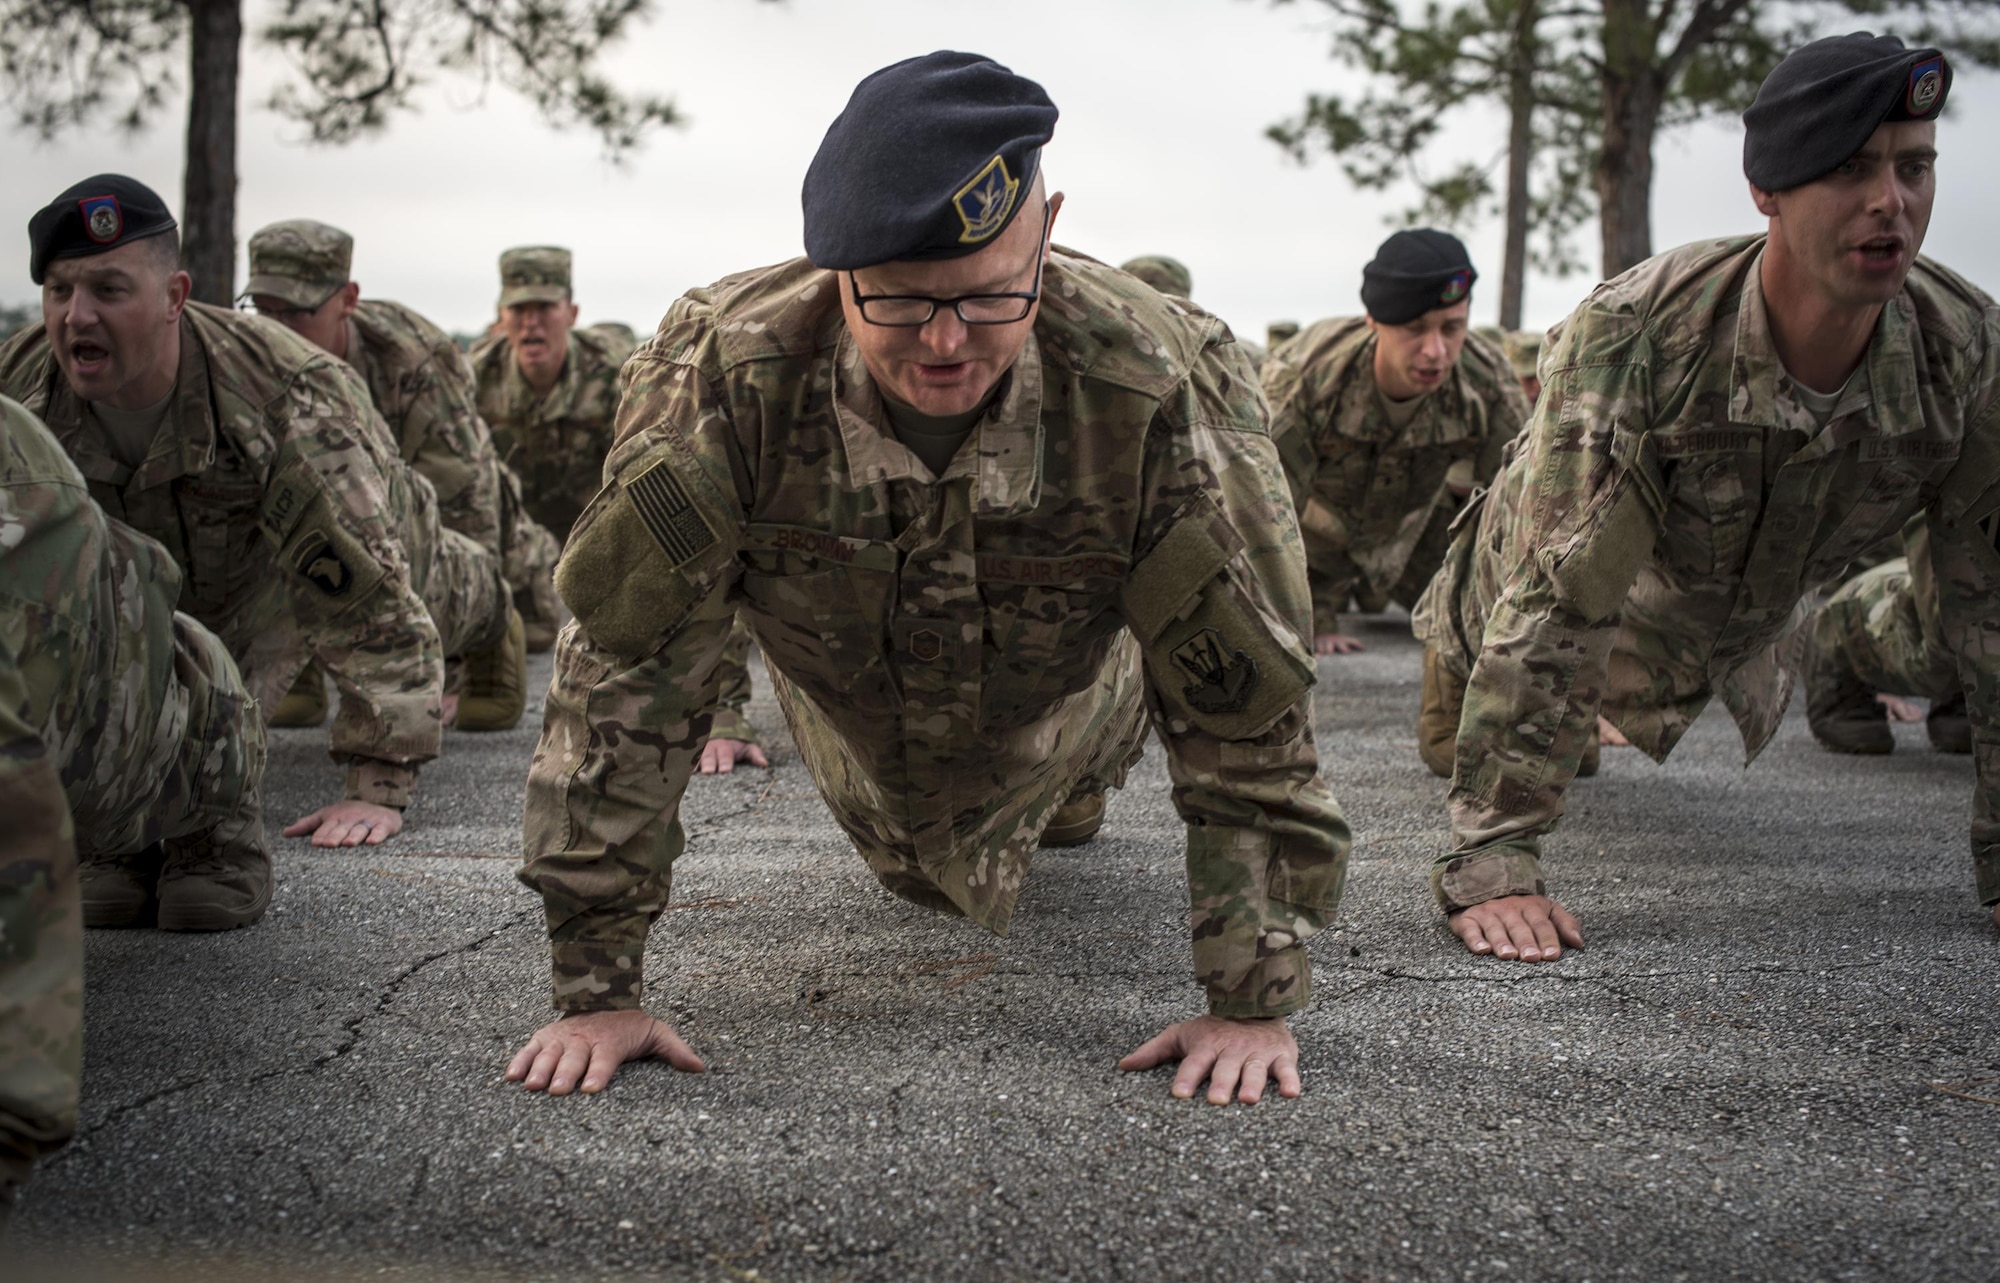 U.S. Air Force Master Sgt. David Brown, 820th Base Defense Group jumpmaster, performs pushups as a tribute to fallen Terminal Air Control Party Airmen, April 15, 2016, at Avon Park Air Force Range, Fla. The Airmen gathered to pay tribute to Lt. Col William Schroeder, who served alongside many members of the 93d AGOW. (U.S. Air Force Photo by Airman 1st Class Janiqua Robinson/Released)
